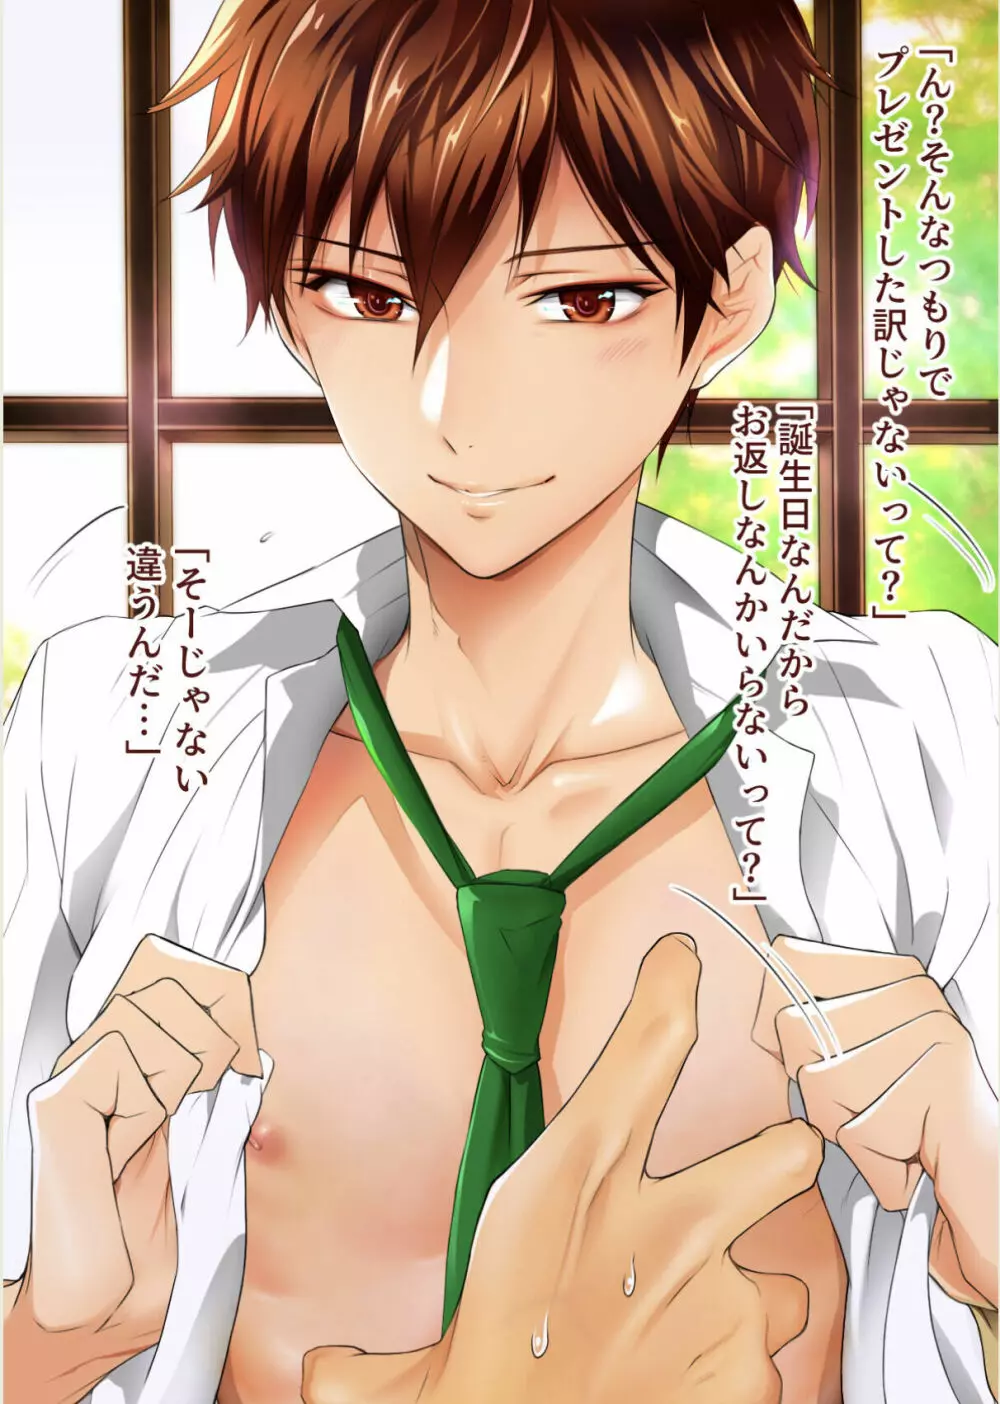 chiaki morisawa is hot and i want him inside me Page.16